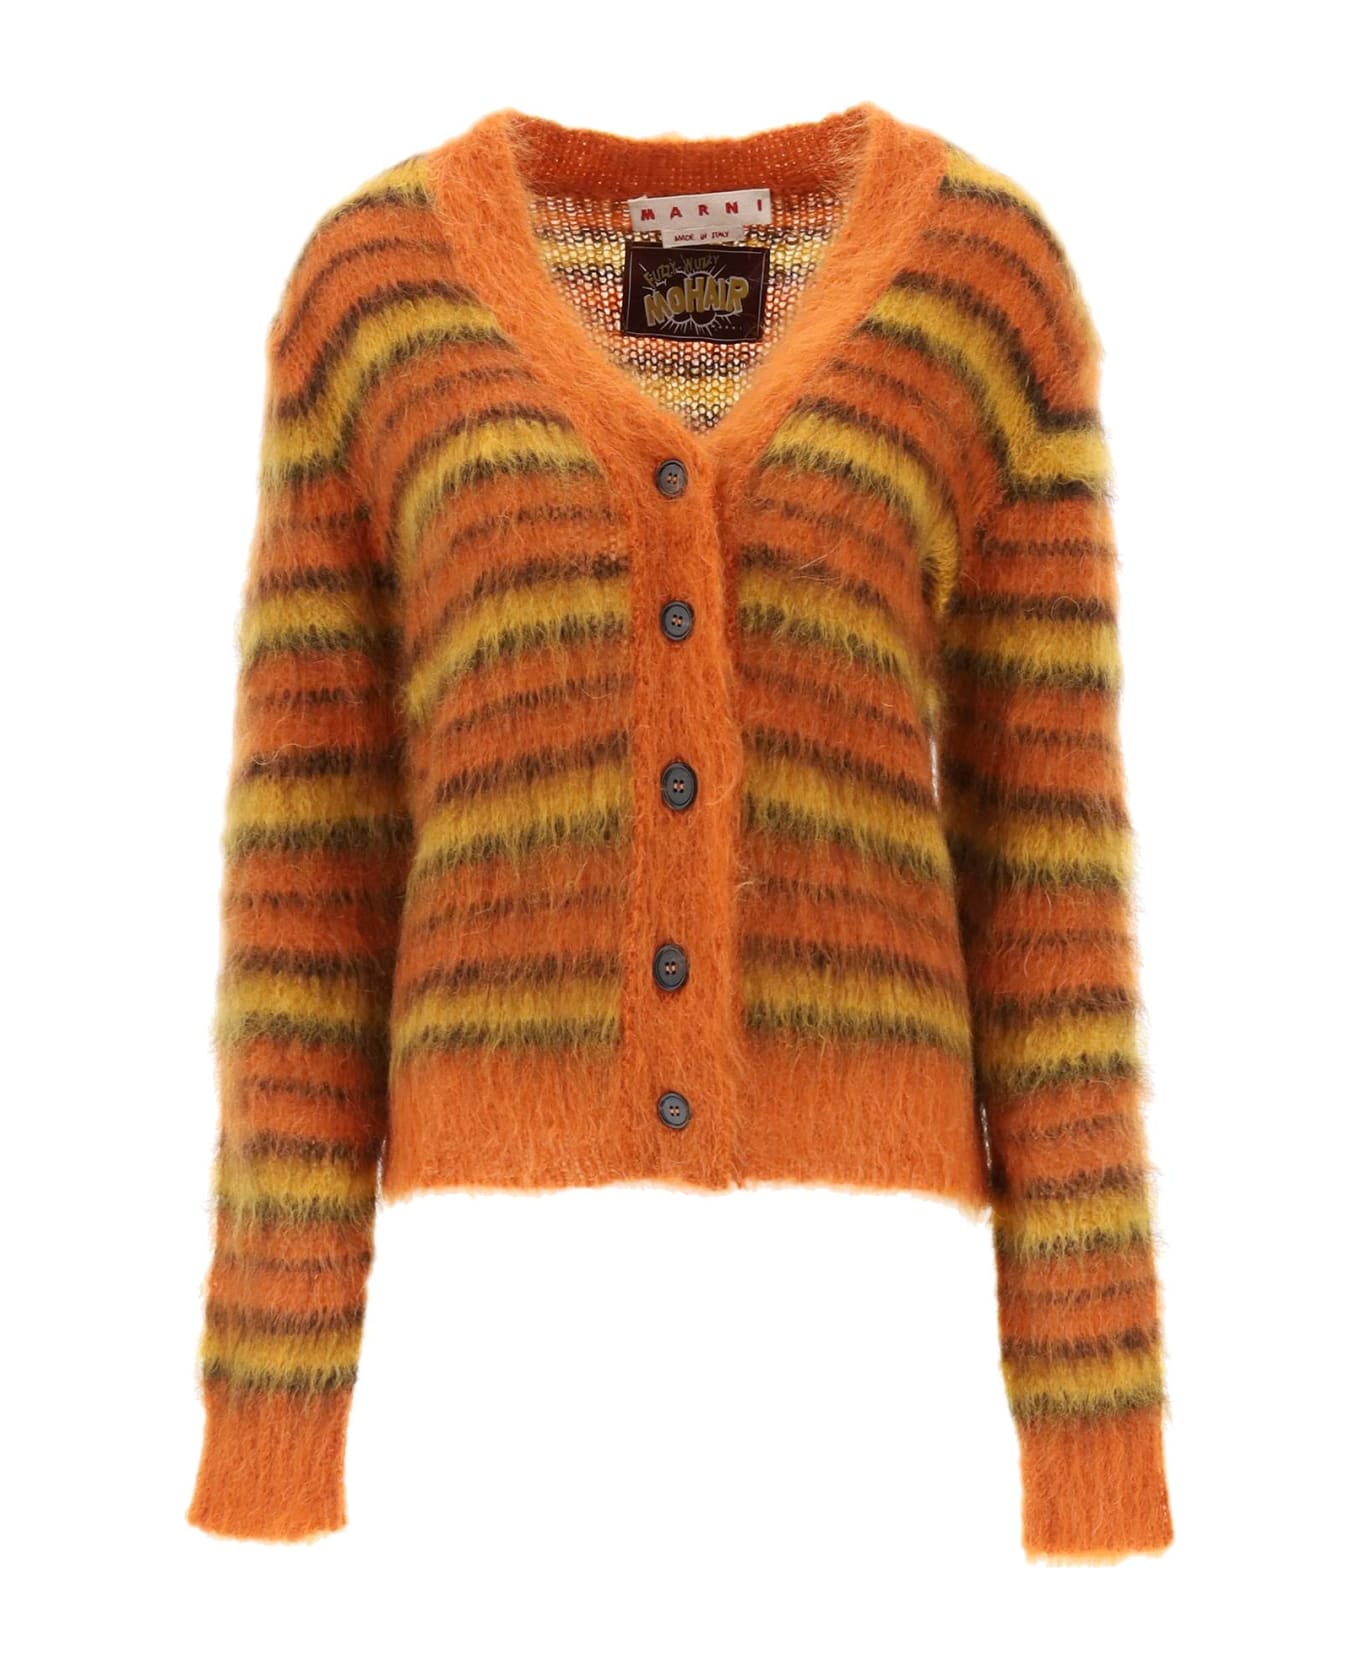 Marni Cardigan In Striped Brushed Mohair - Brick Red カーディガン